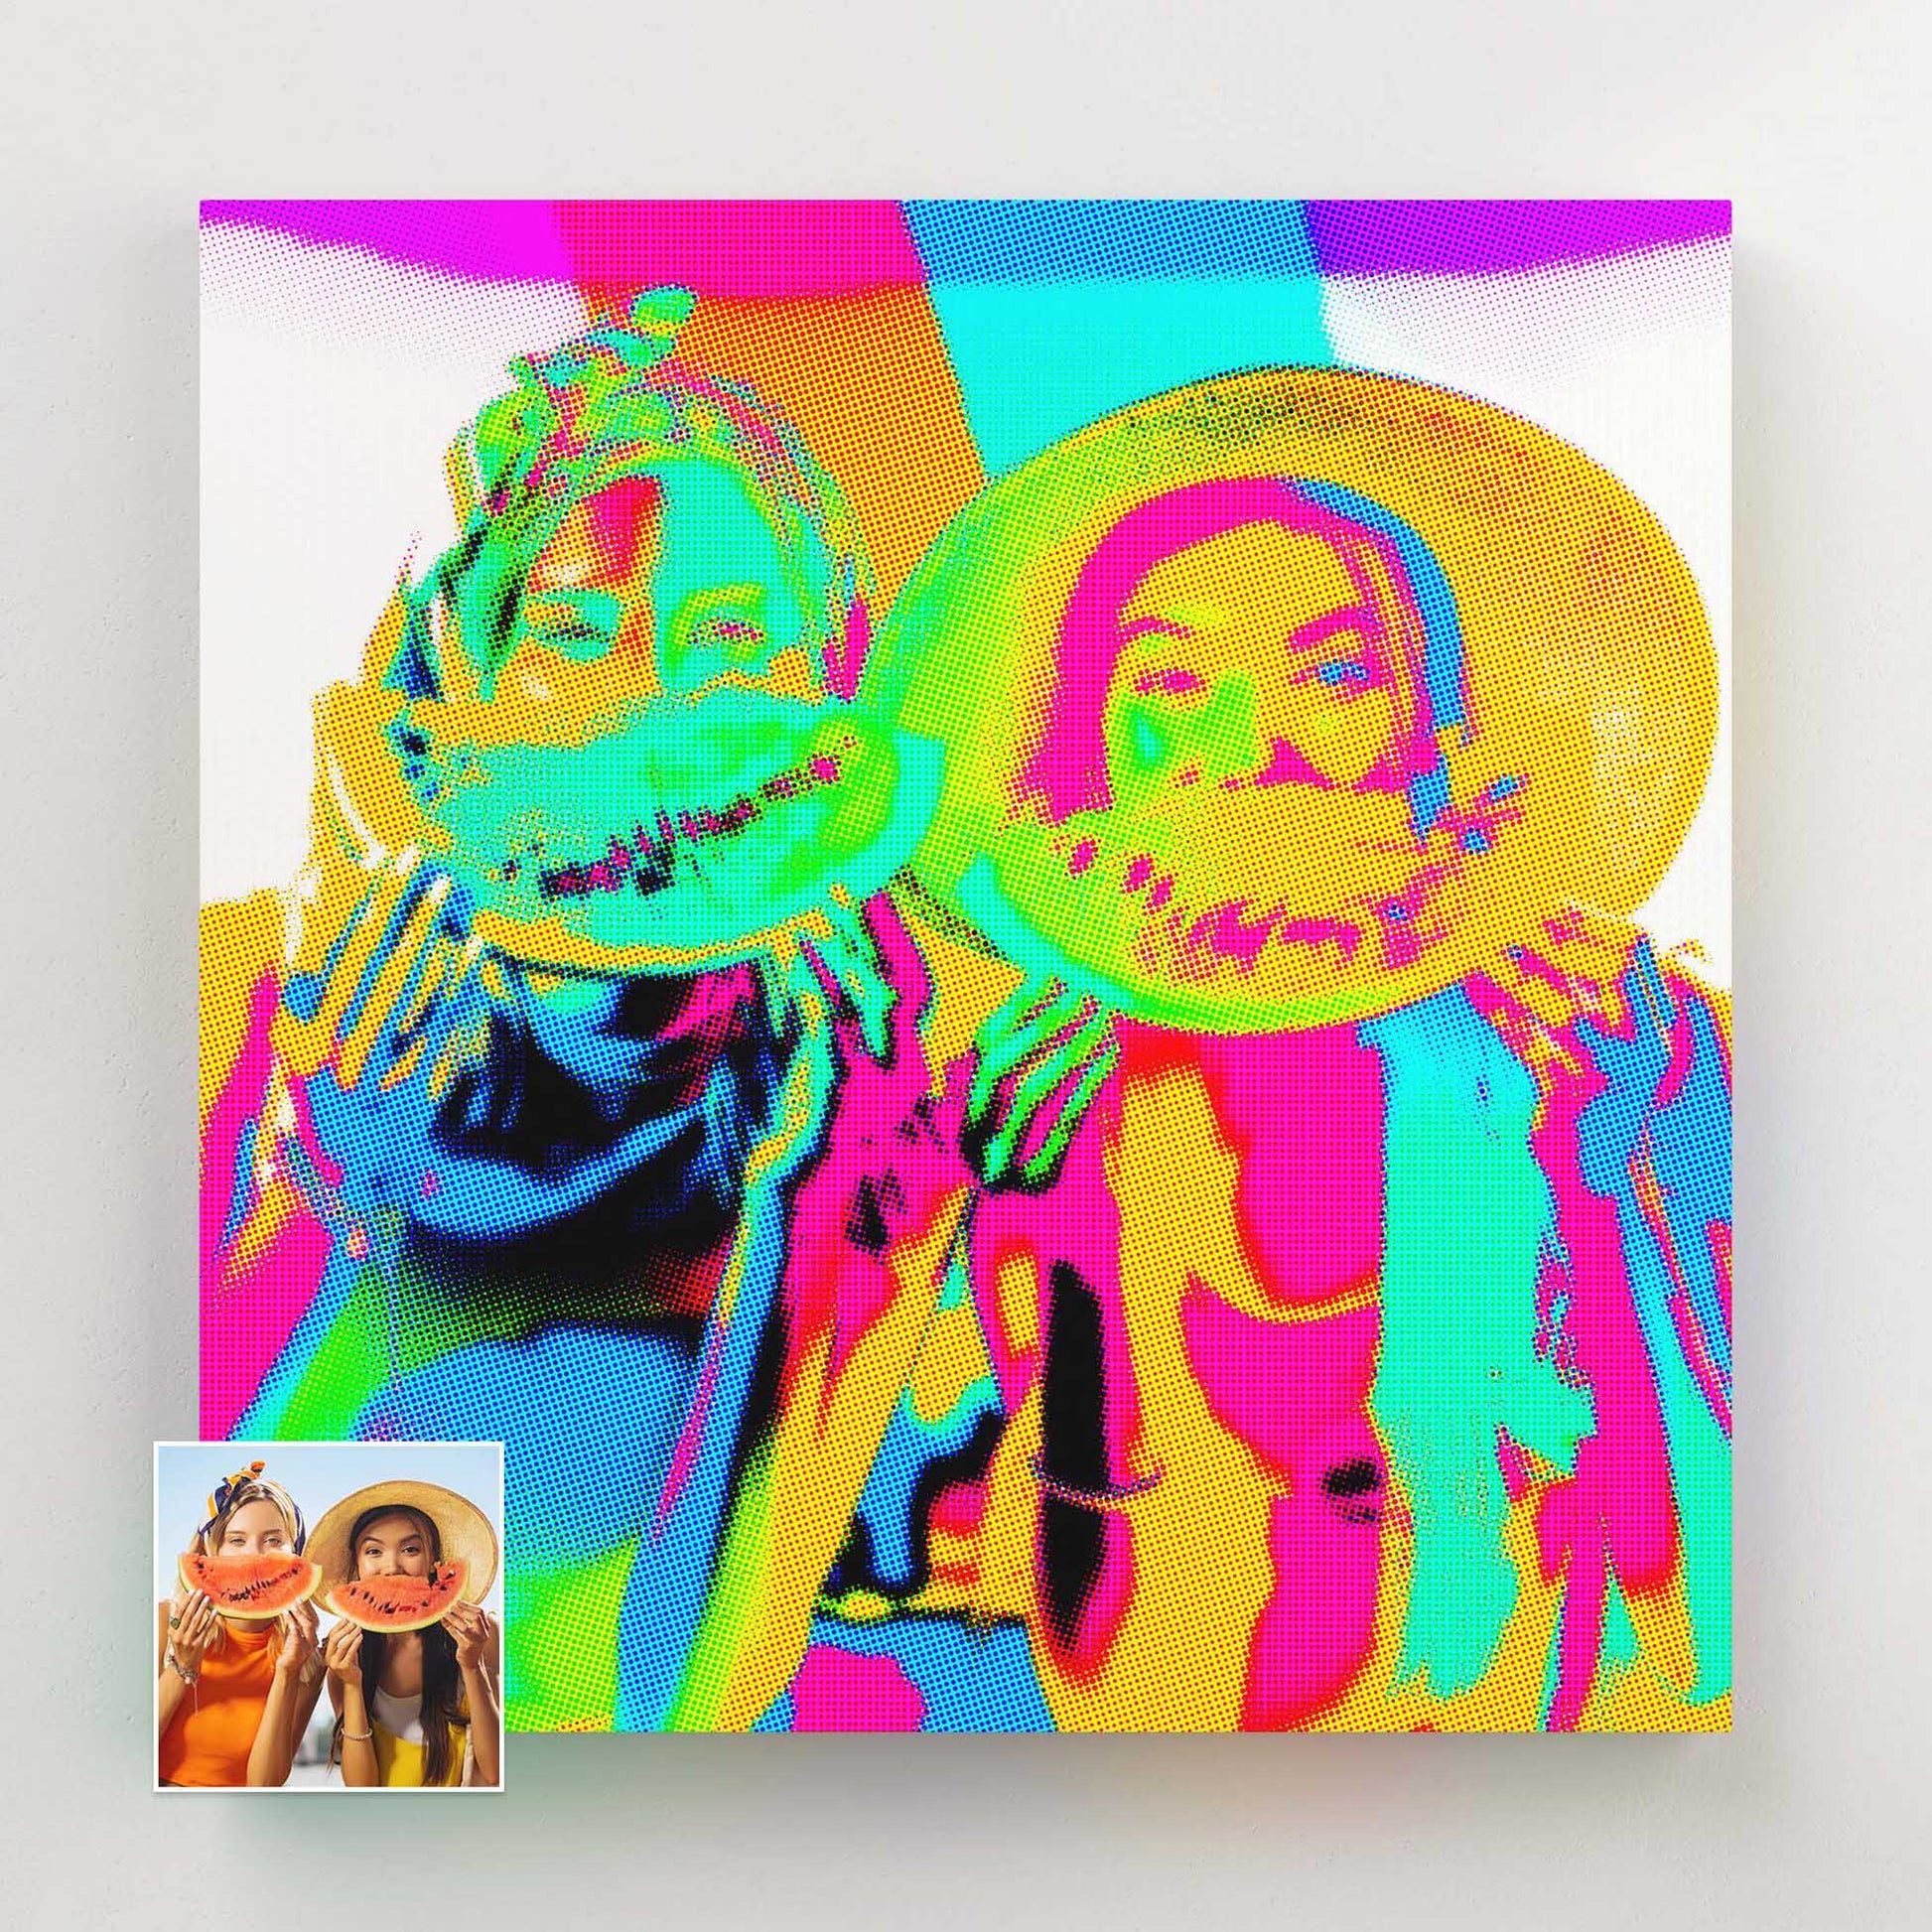 Personalize your space with a vibrant Pop Art Canvas. Printed from your photo, this handmade masterpiece features a halftone texture on canvas, adding depth and character. The cool and trendy urban aesthetic